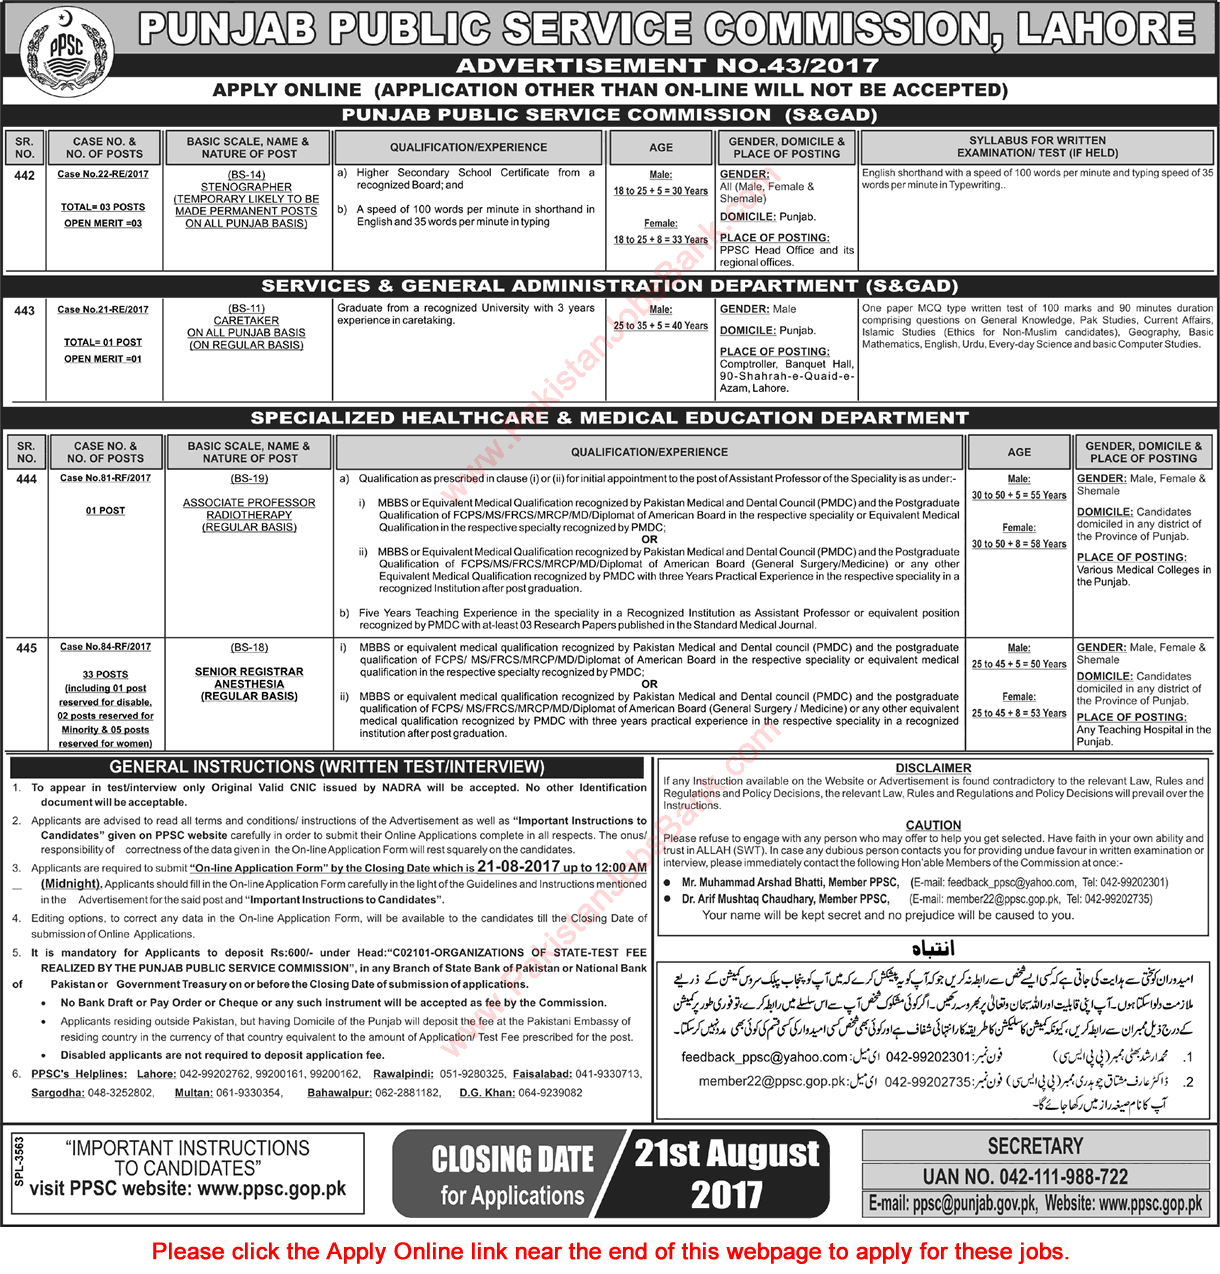 PPSC Jobs August 2017 Apply Online Consolidated Advertisement No 43/2017 Latest